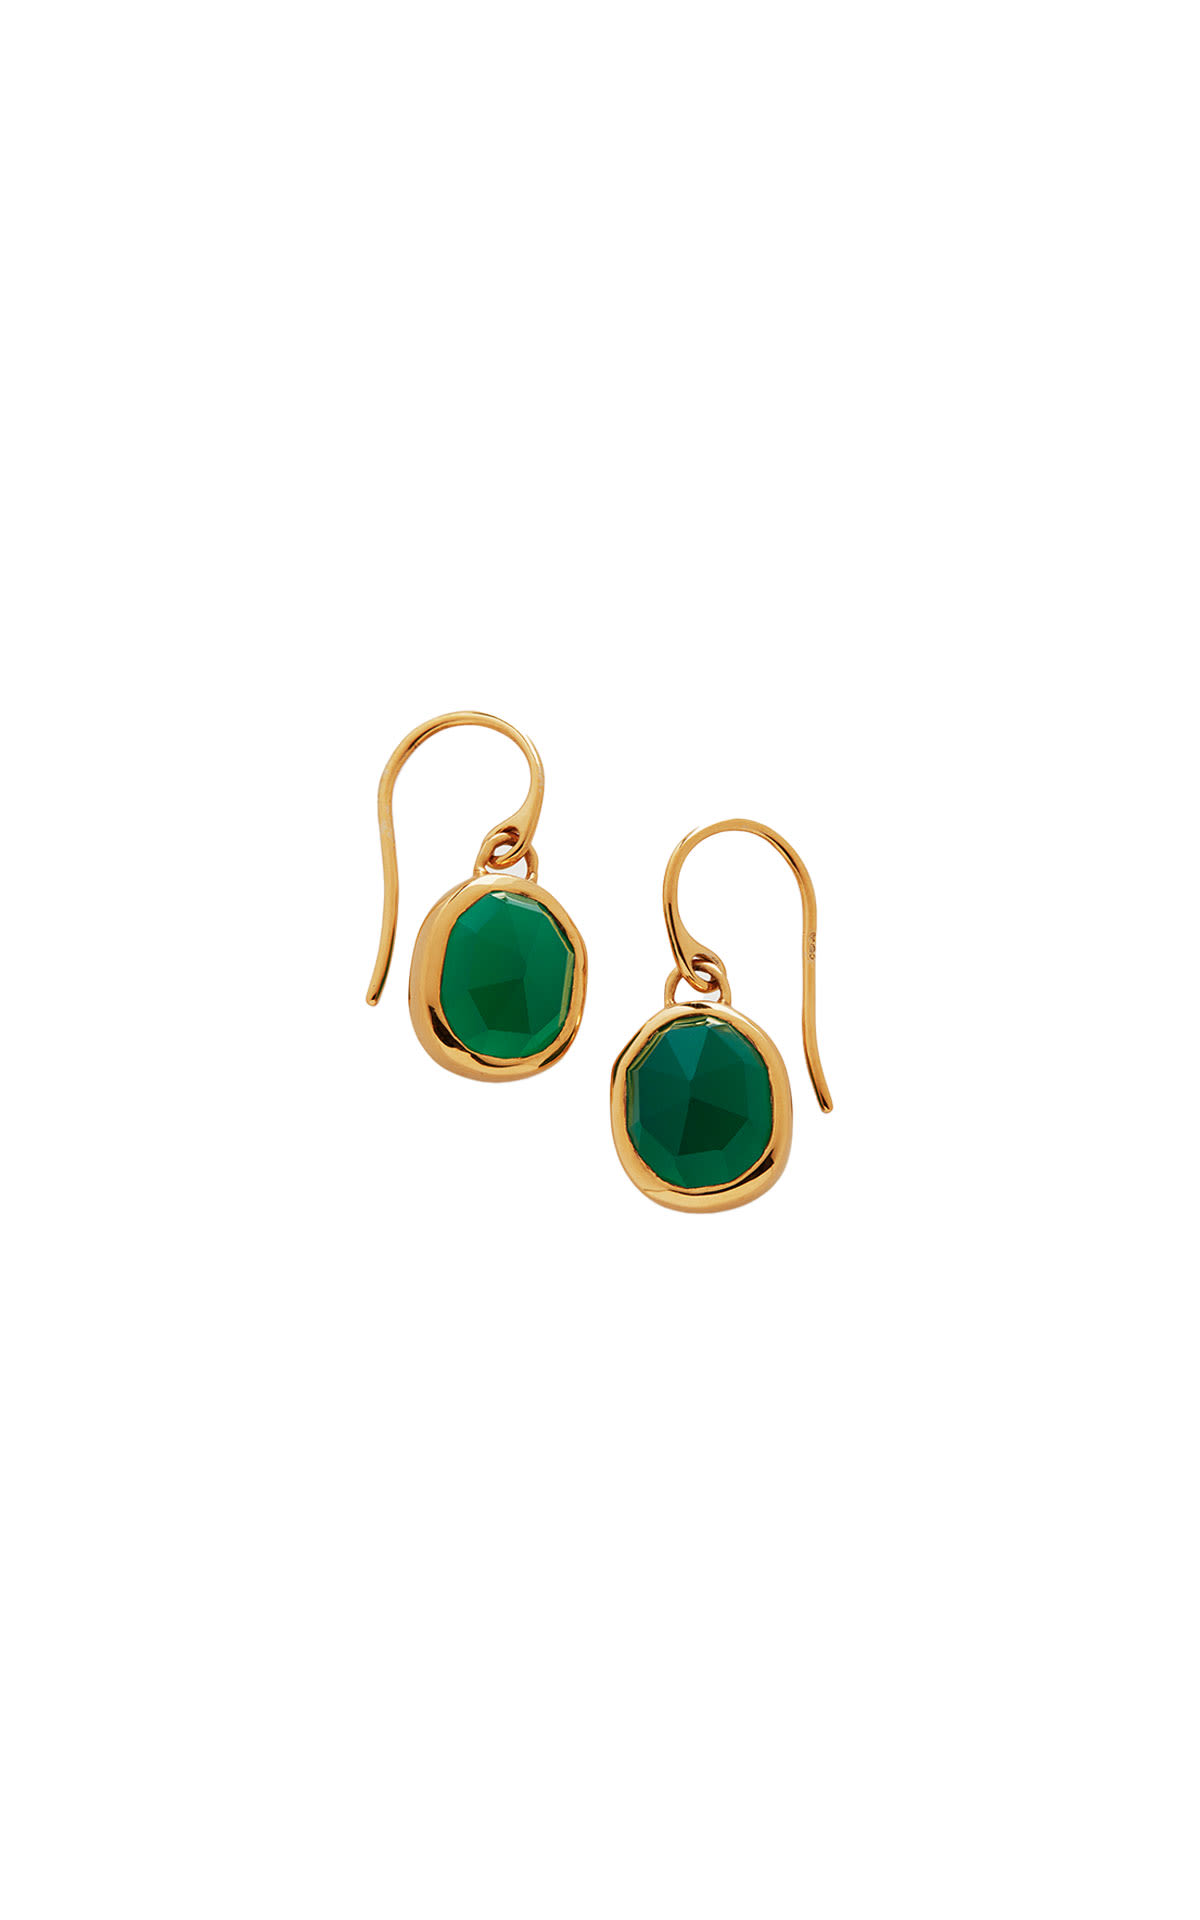 Monica Vinader GP Siren wire earrings green onyx from Bicester Village